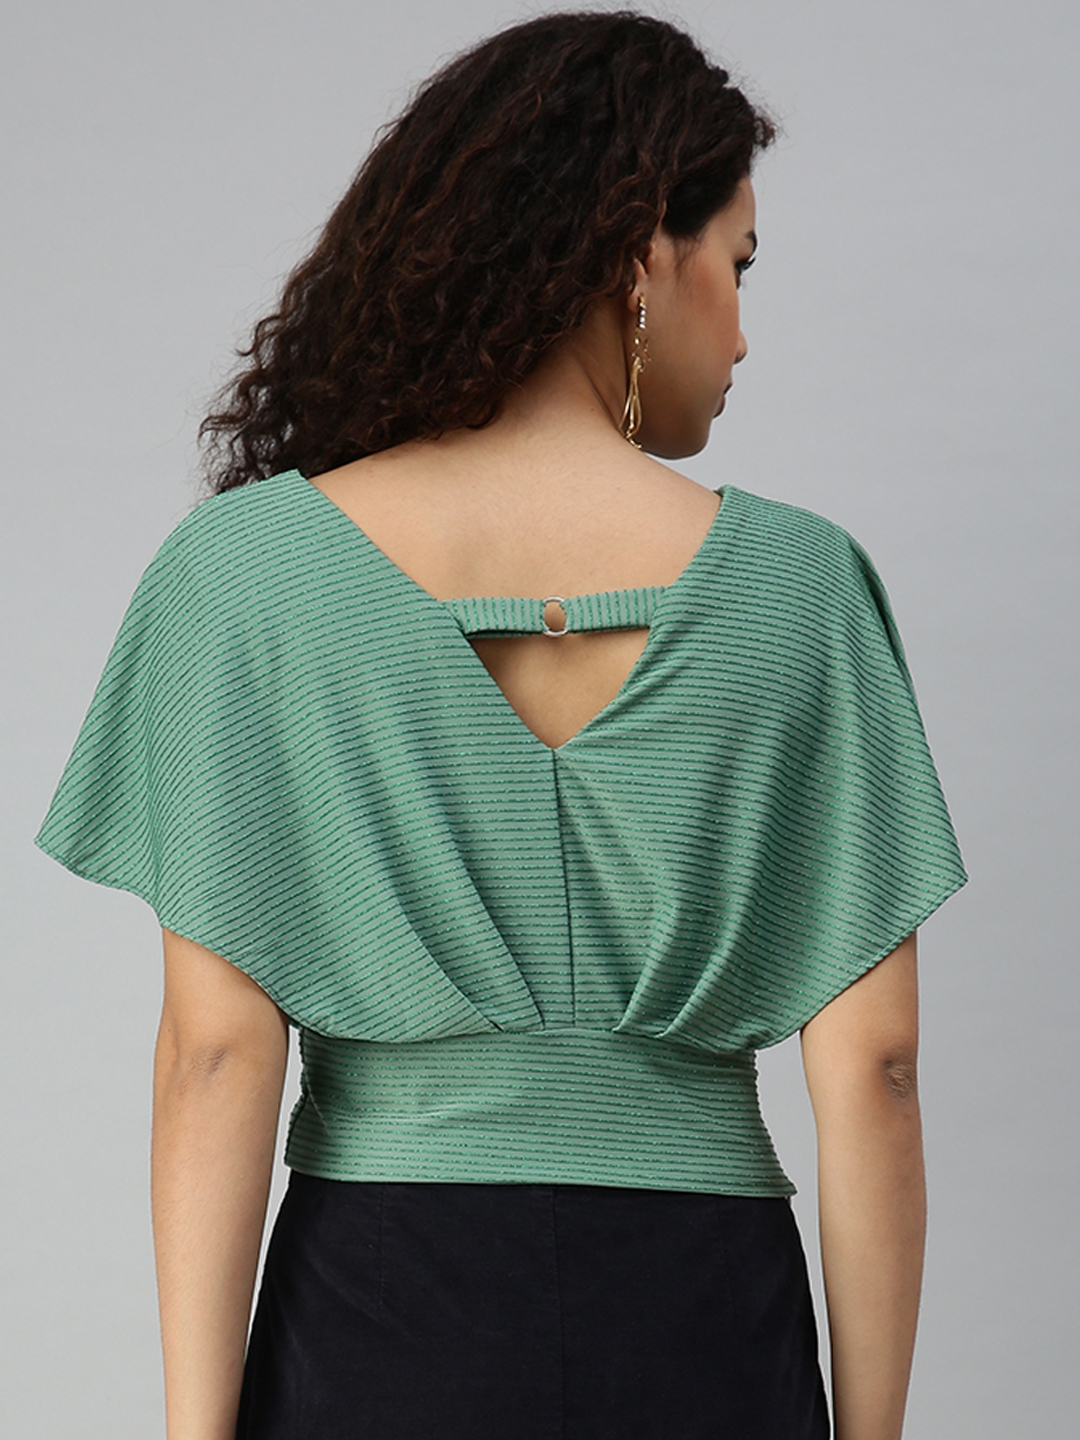 Women's Green Polyester Solid Tops